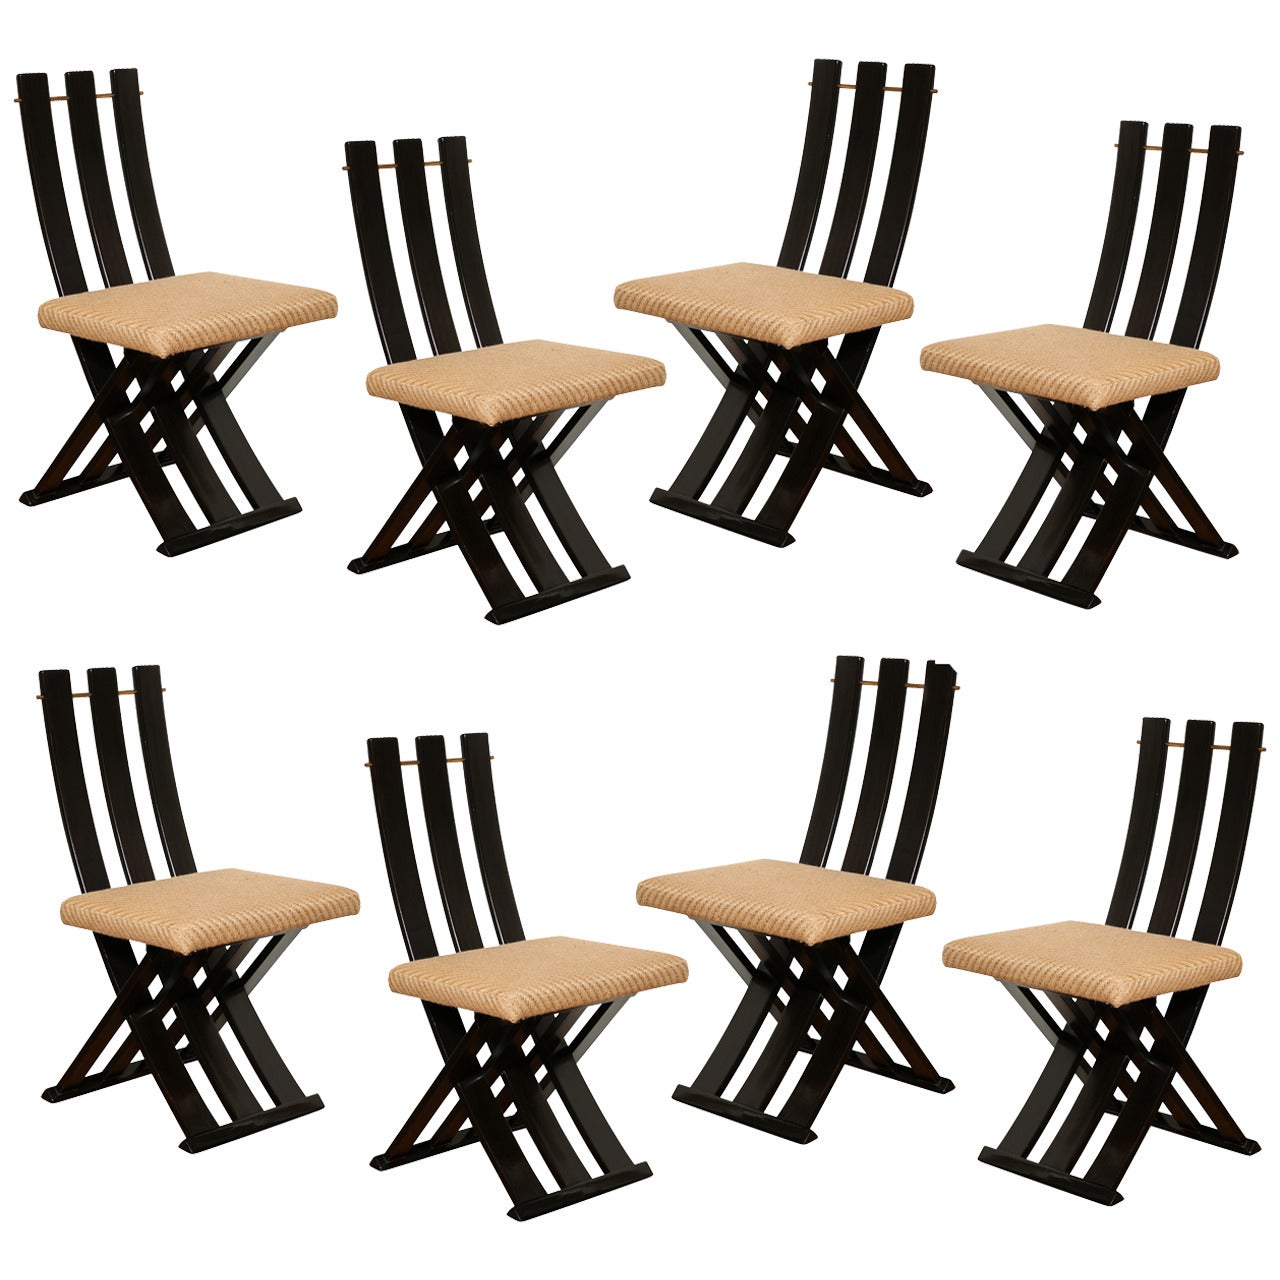 A Set of Eight Mid-Century Modern Scissor Chairs by Harvey Prober